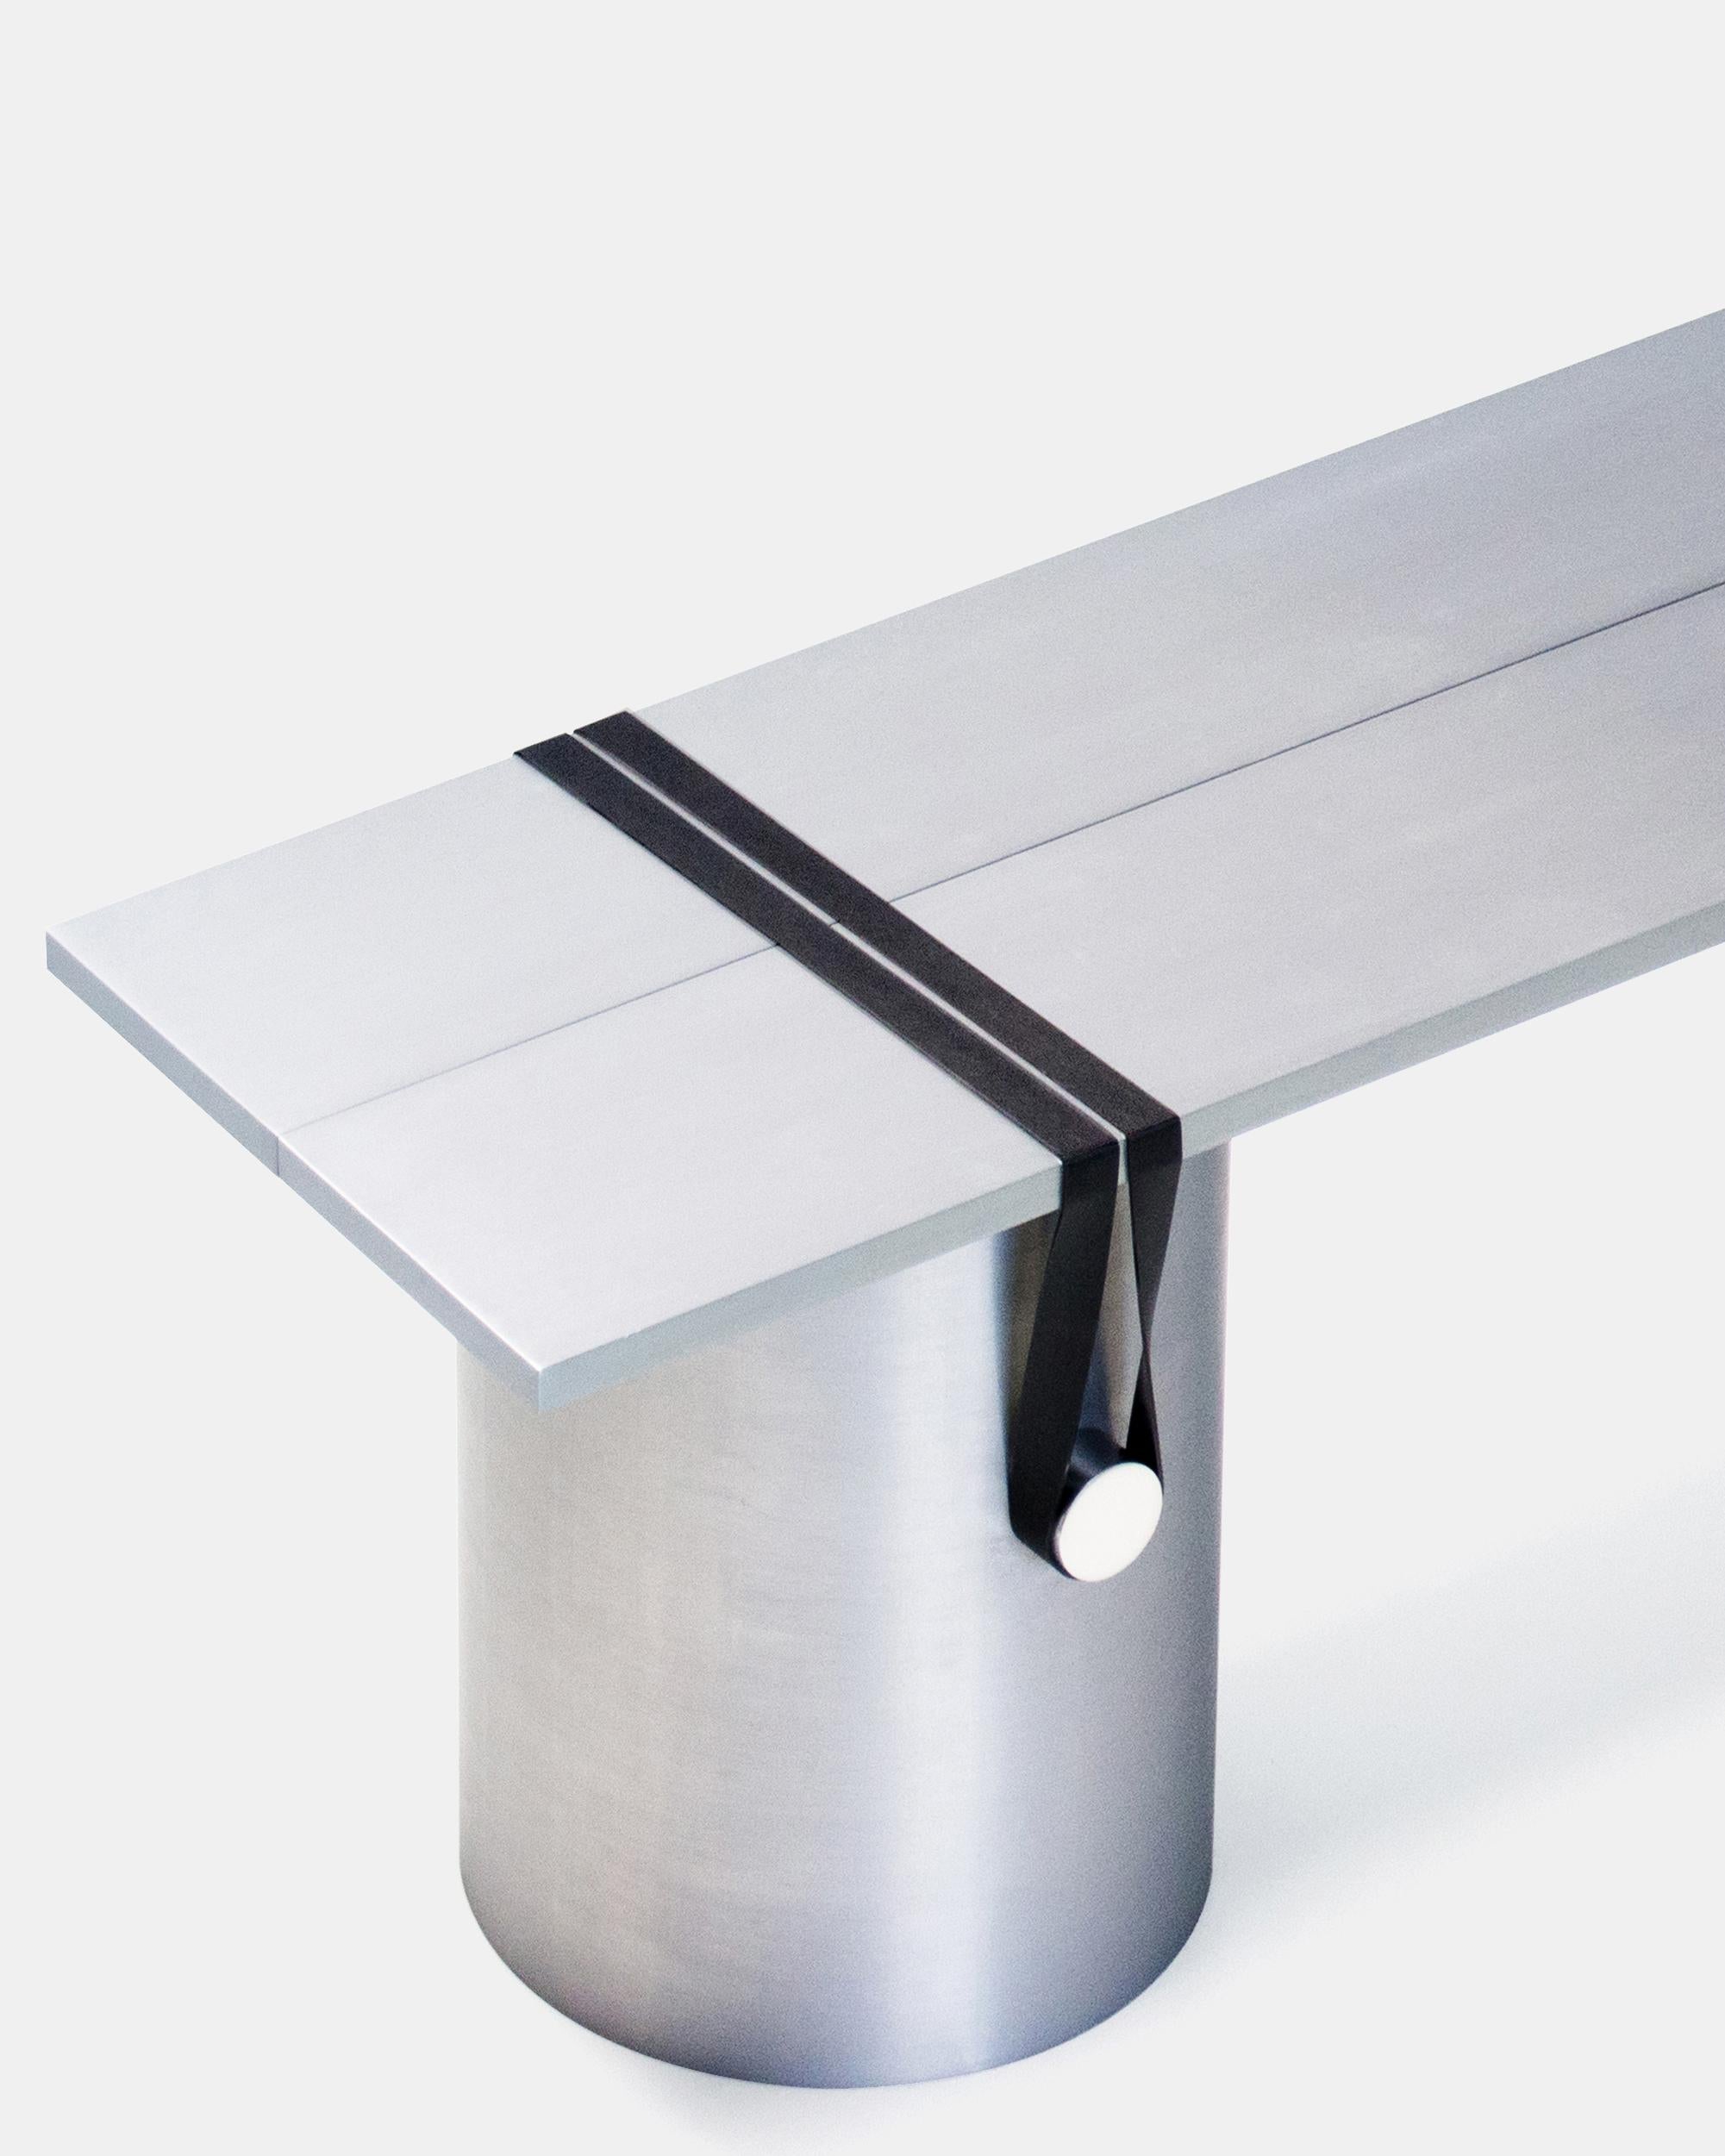 Contemporary side table/bench by Johan Viladrich
Bench/table
Anodised aluminum, rubber
Size: L 160, W 40, H 40 cm
Approximate 60kg
Limited Edition of 5 + 1AP

The table is composed of two brushed aluminium plates leaning onto three lightly